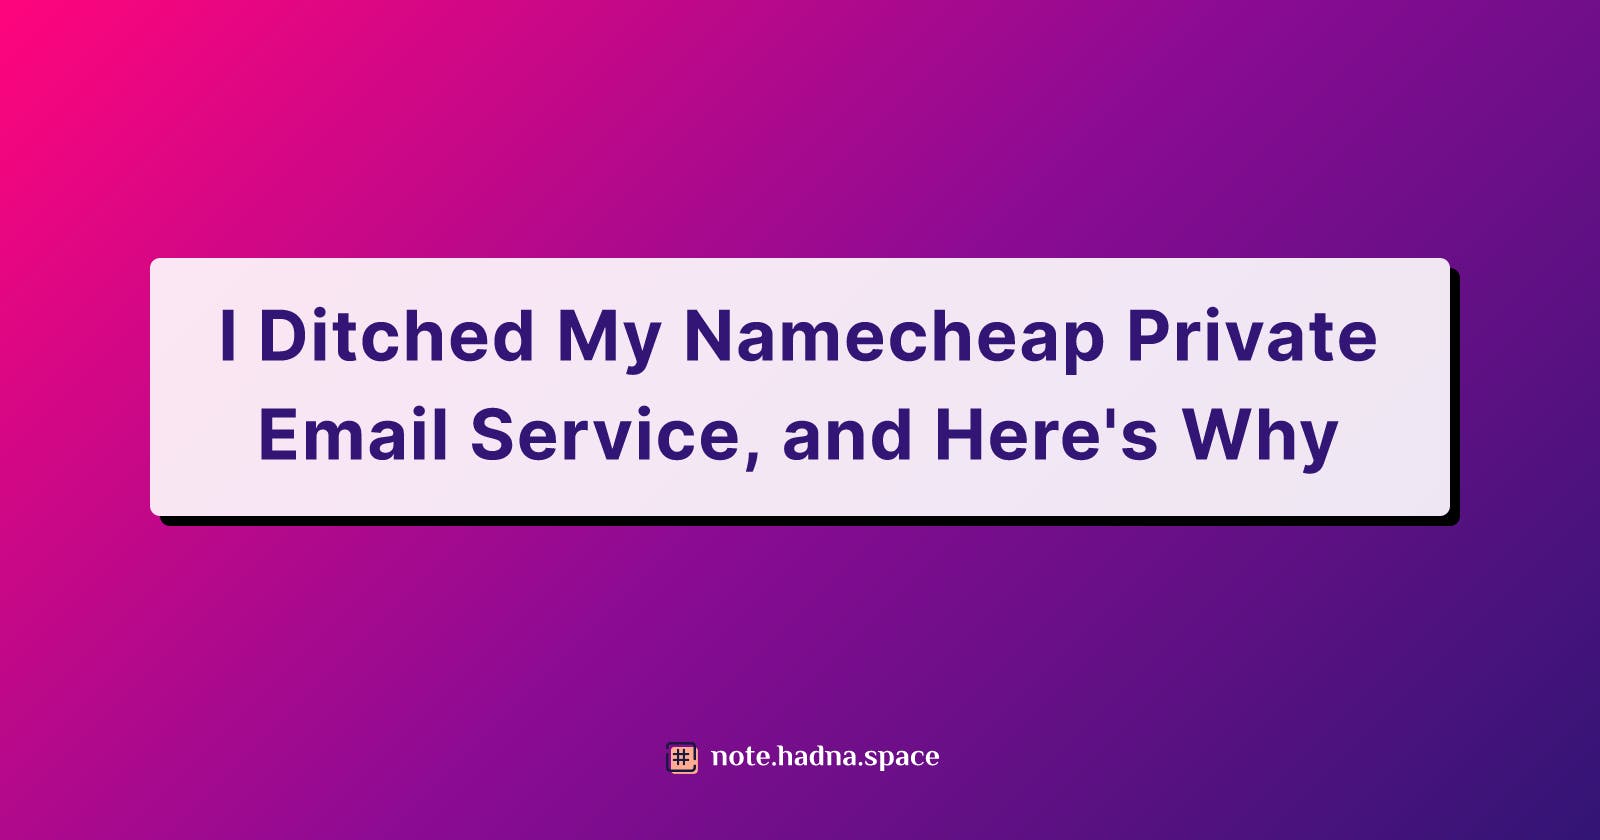 I Ditched My Namecheap Private Email Service, and Here's Why